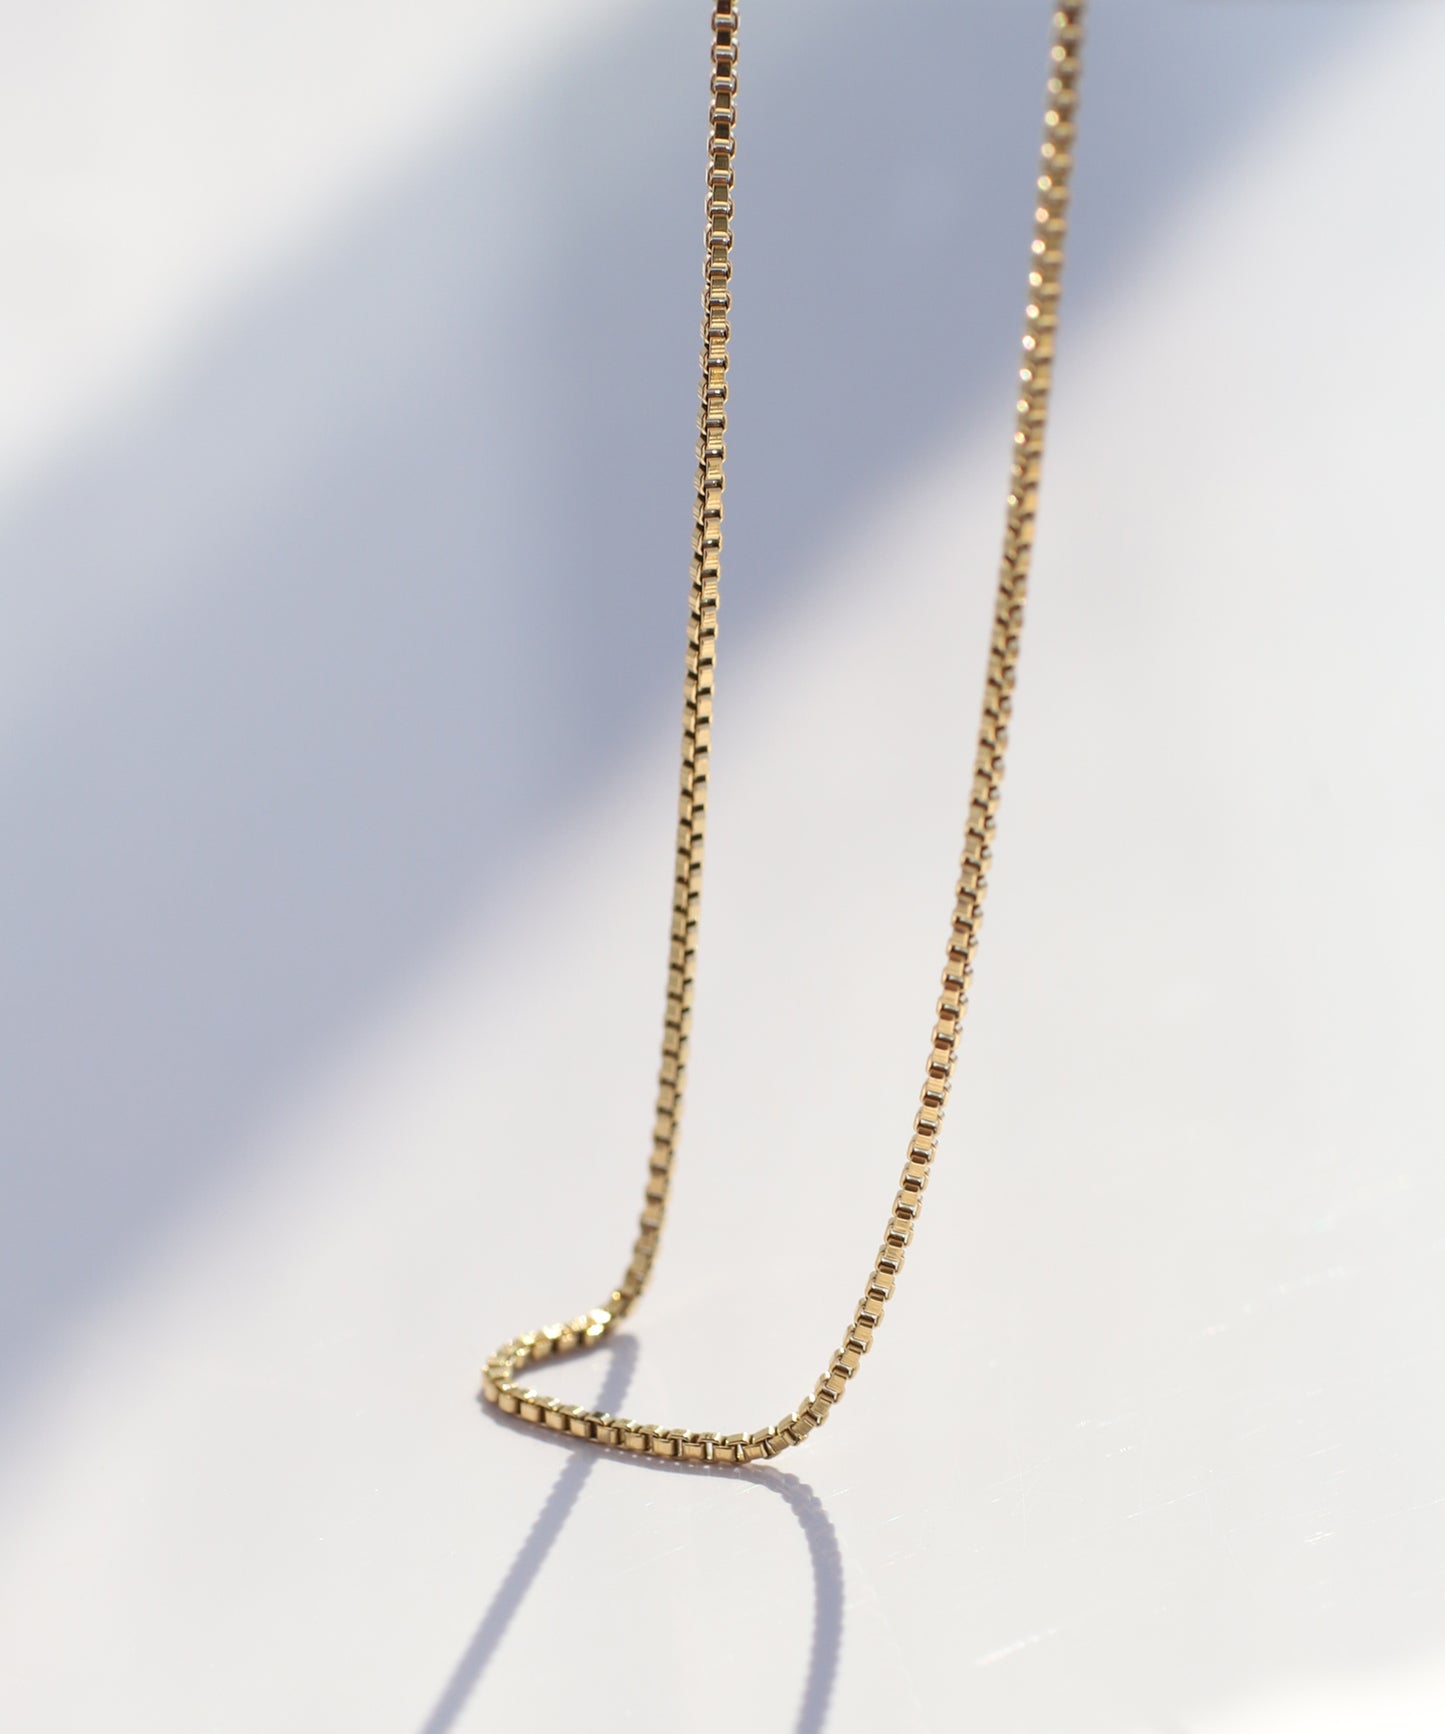 【Stainless Steel IP】Venetian Chain Necklace [A]